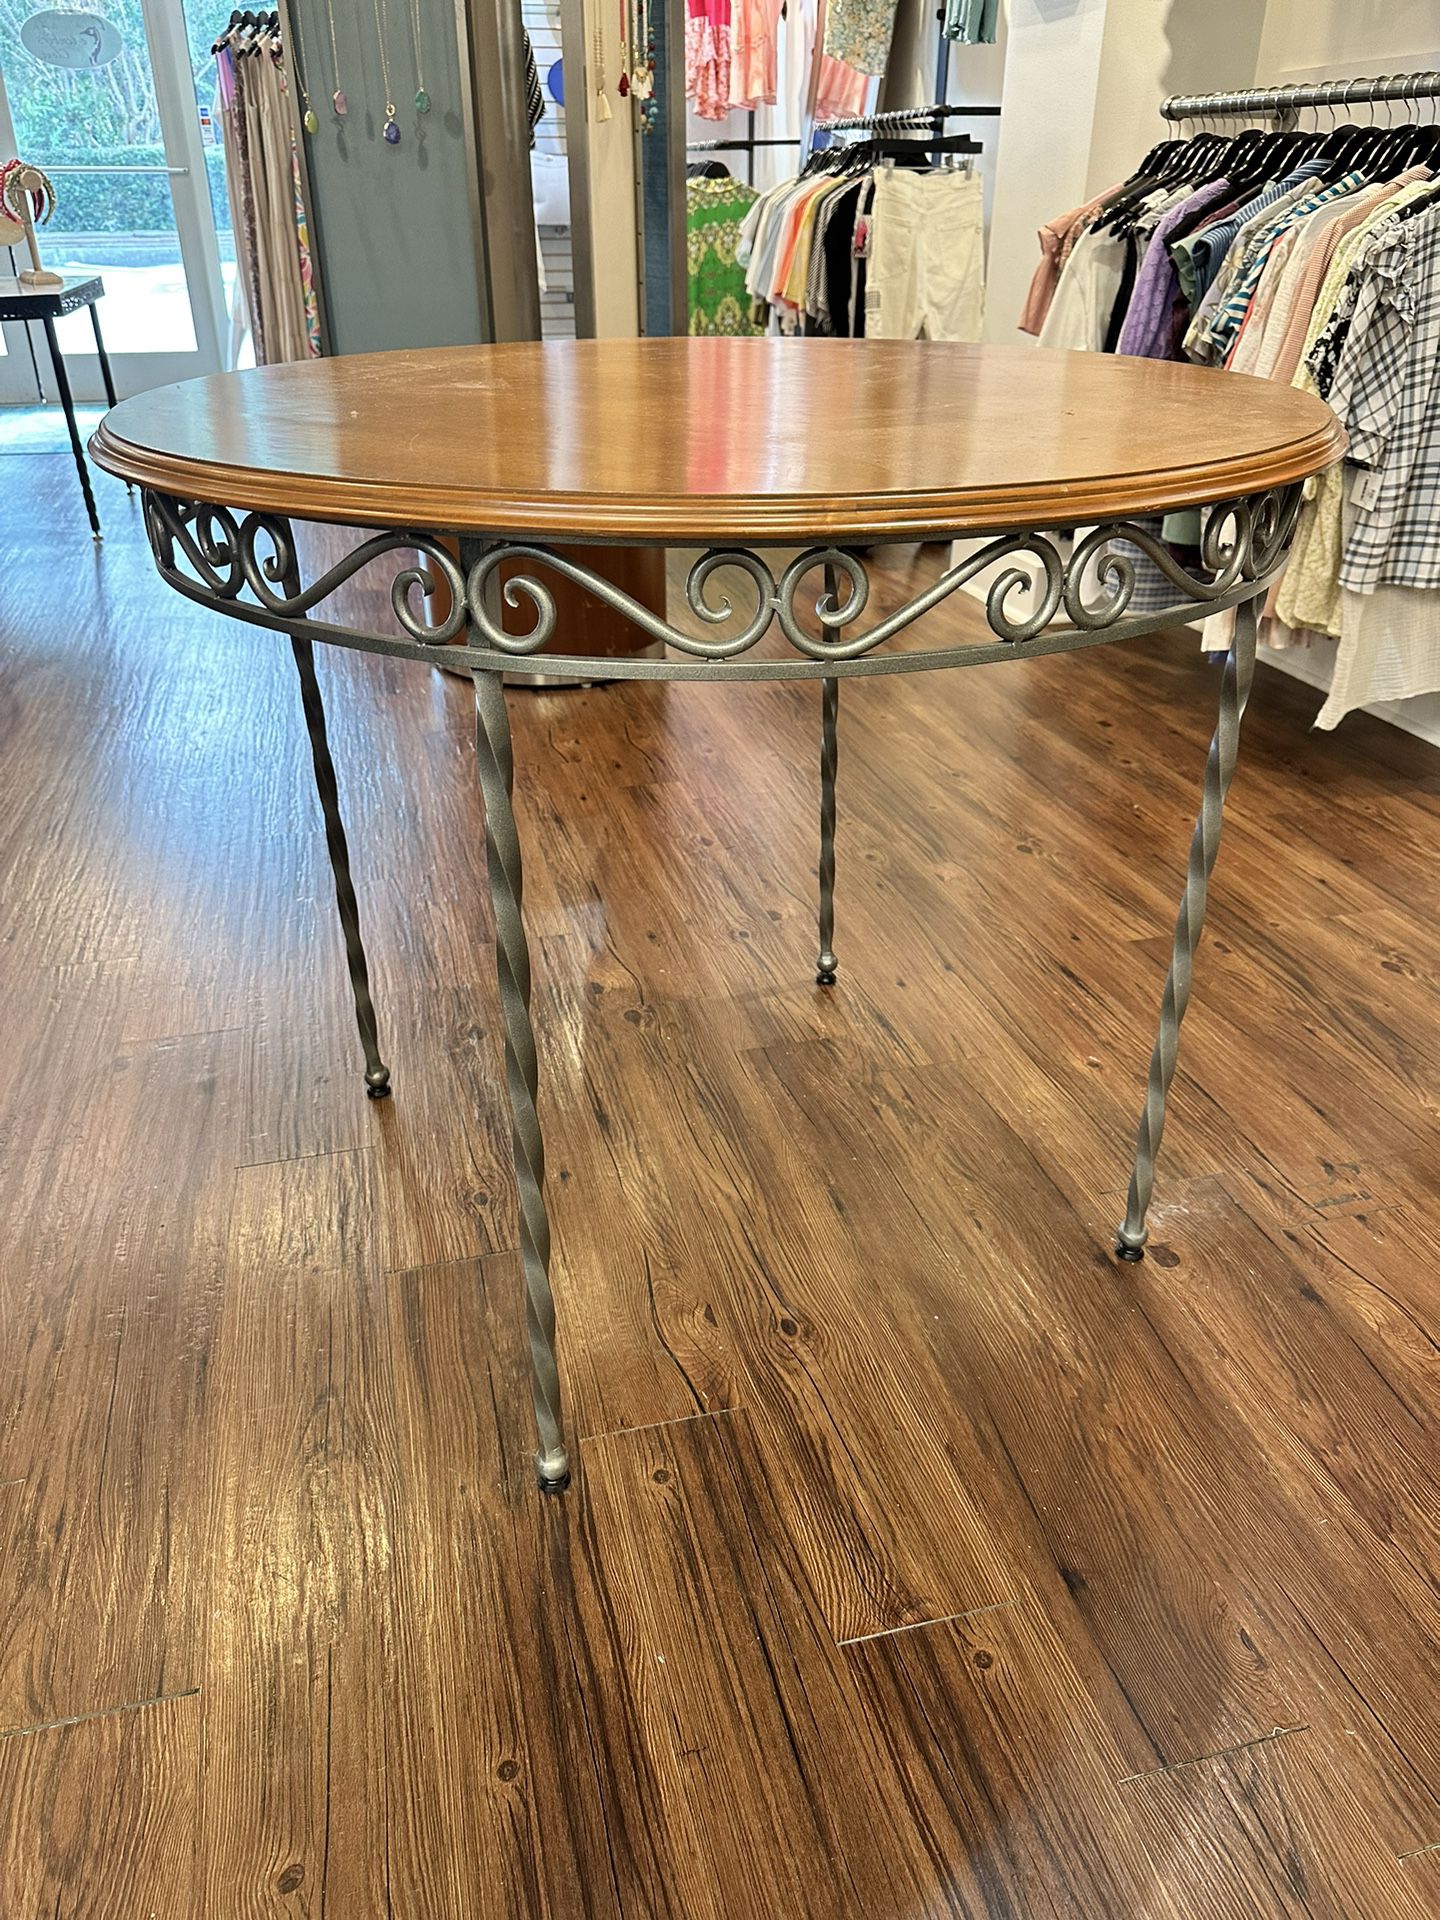 Display/dining table